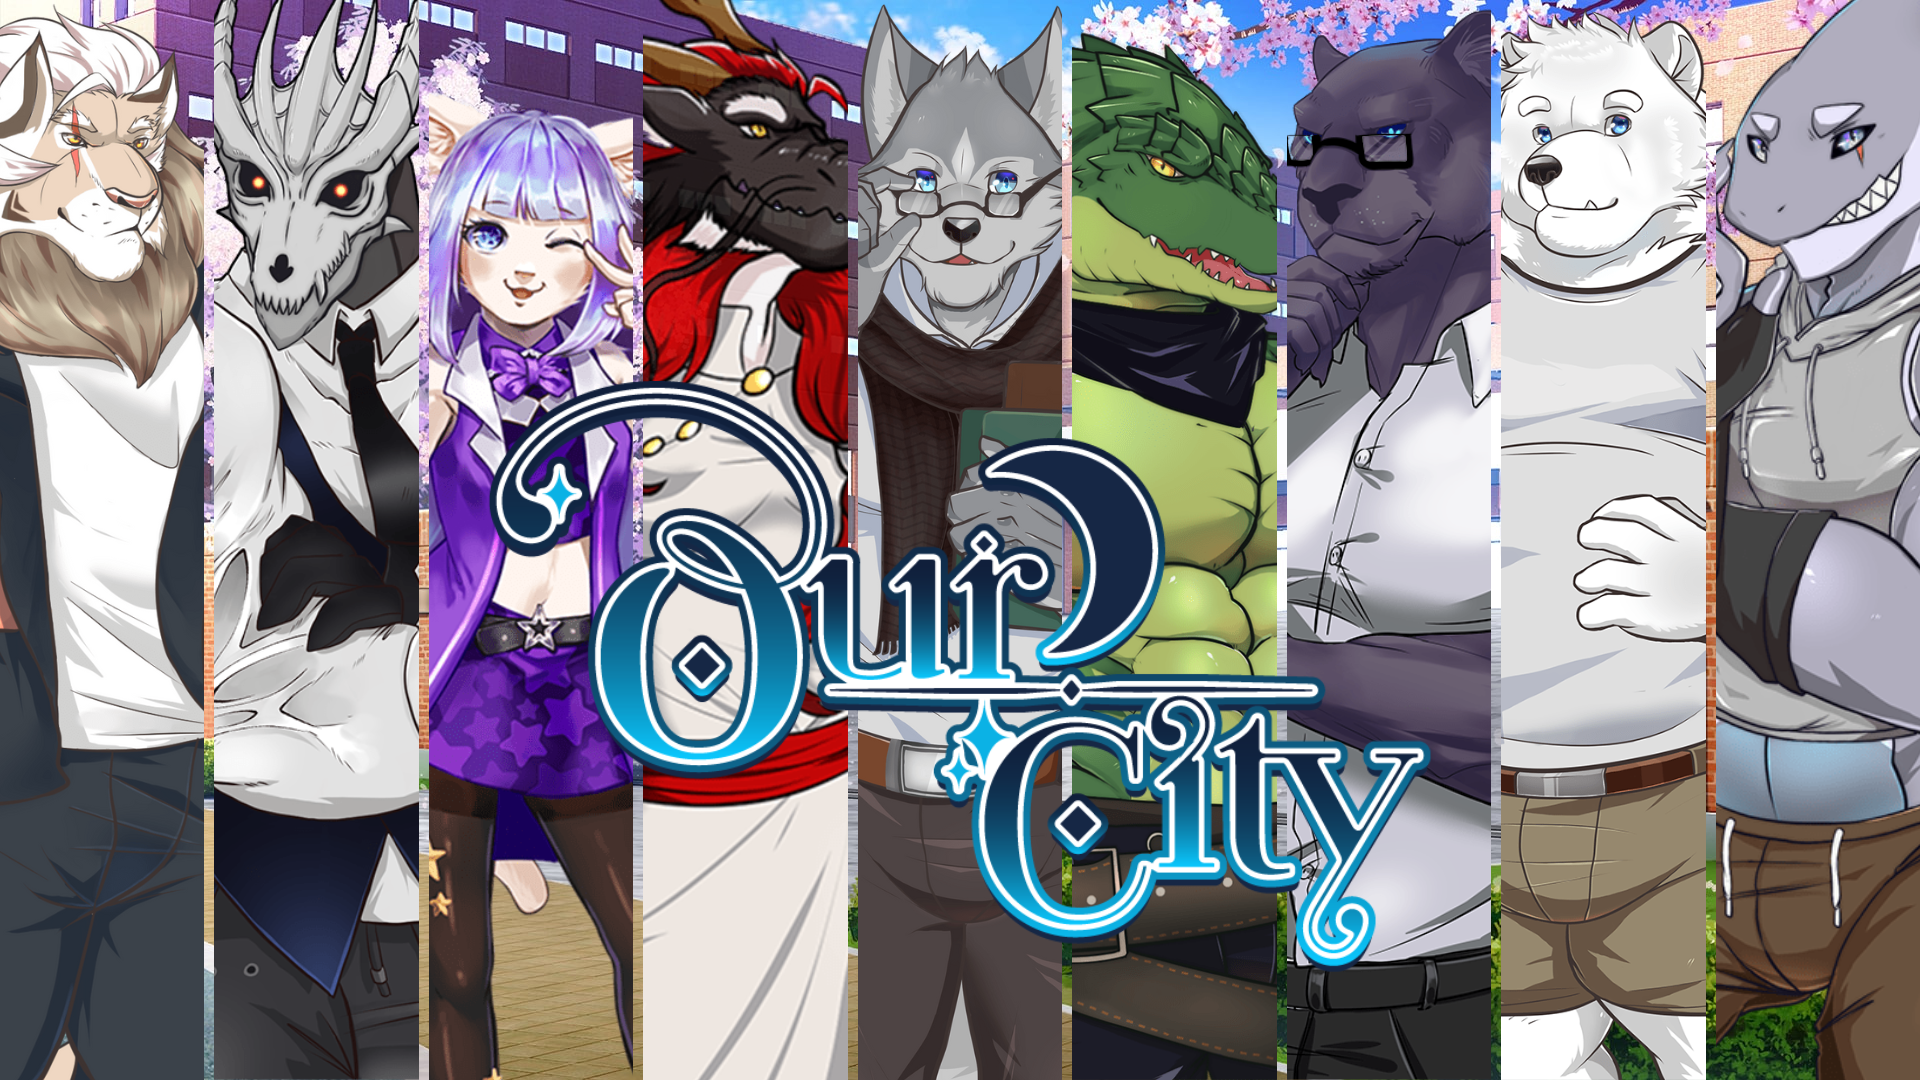 Our City - A New Journey